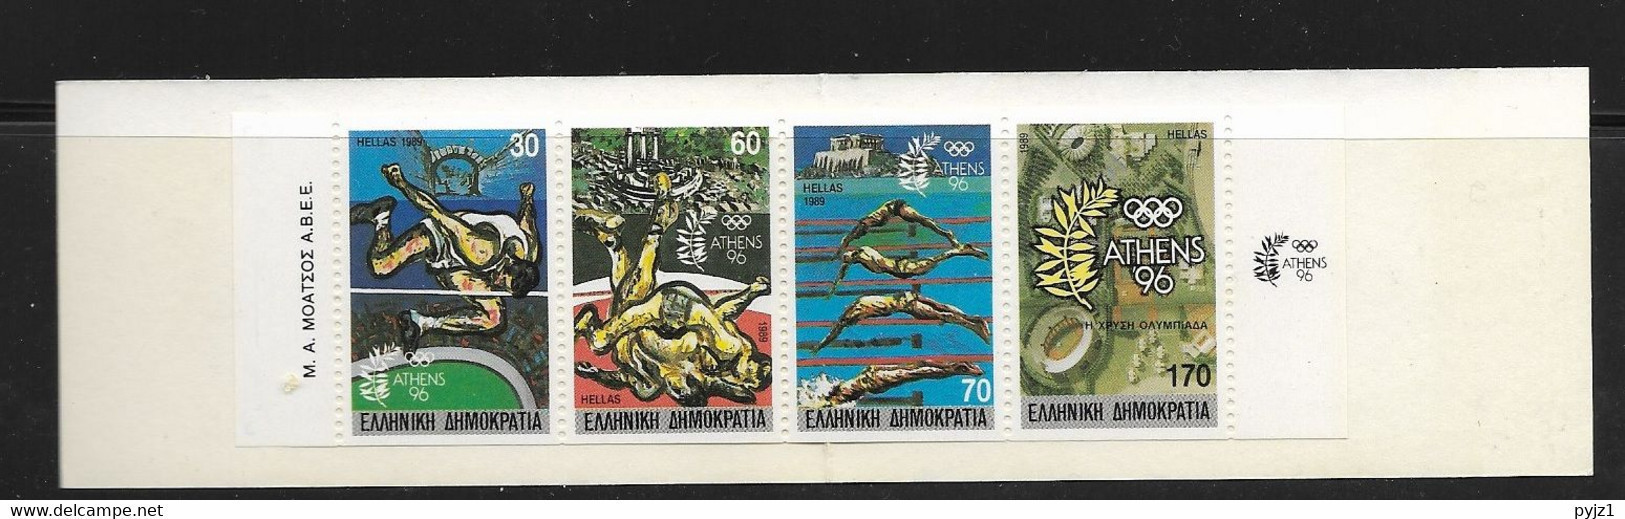 1989 MNH  Greece, Booklet Olympic Games  MH11 - Booklets